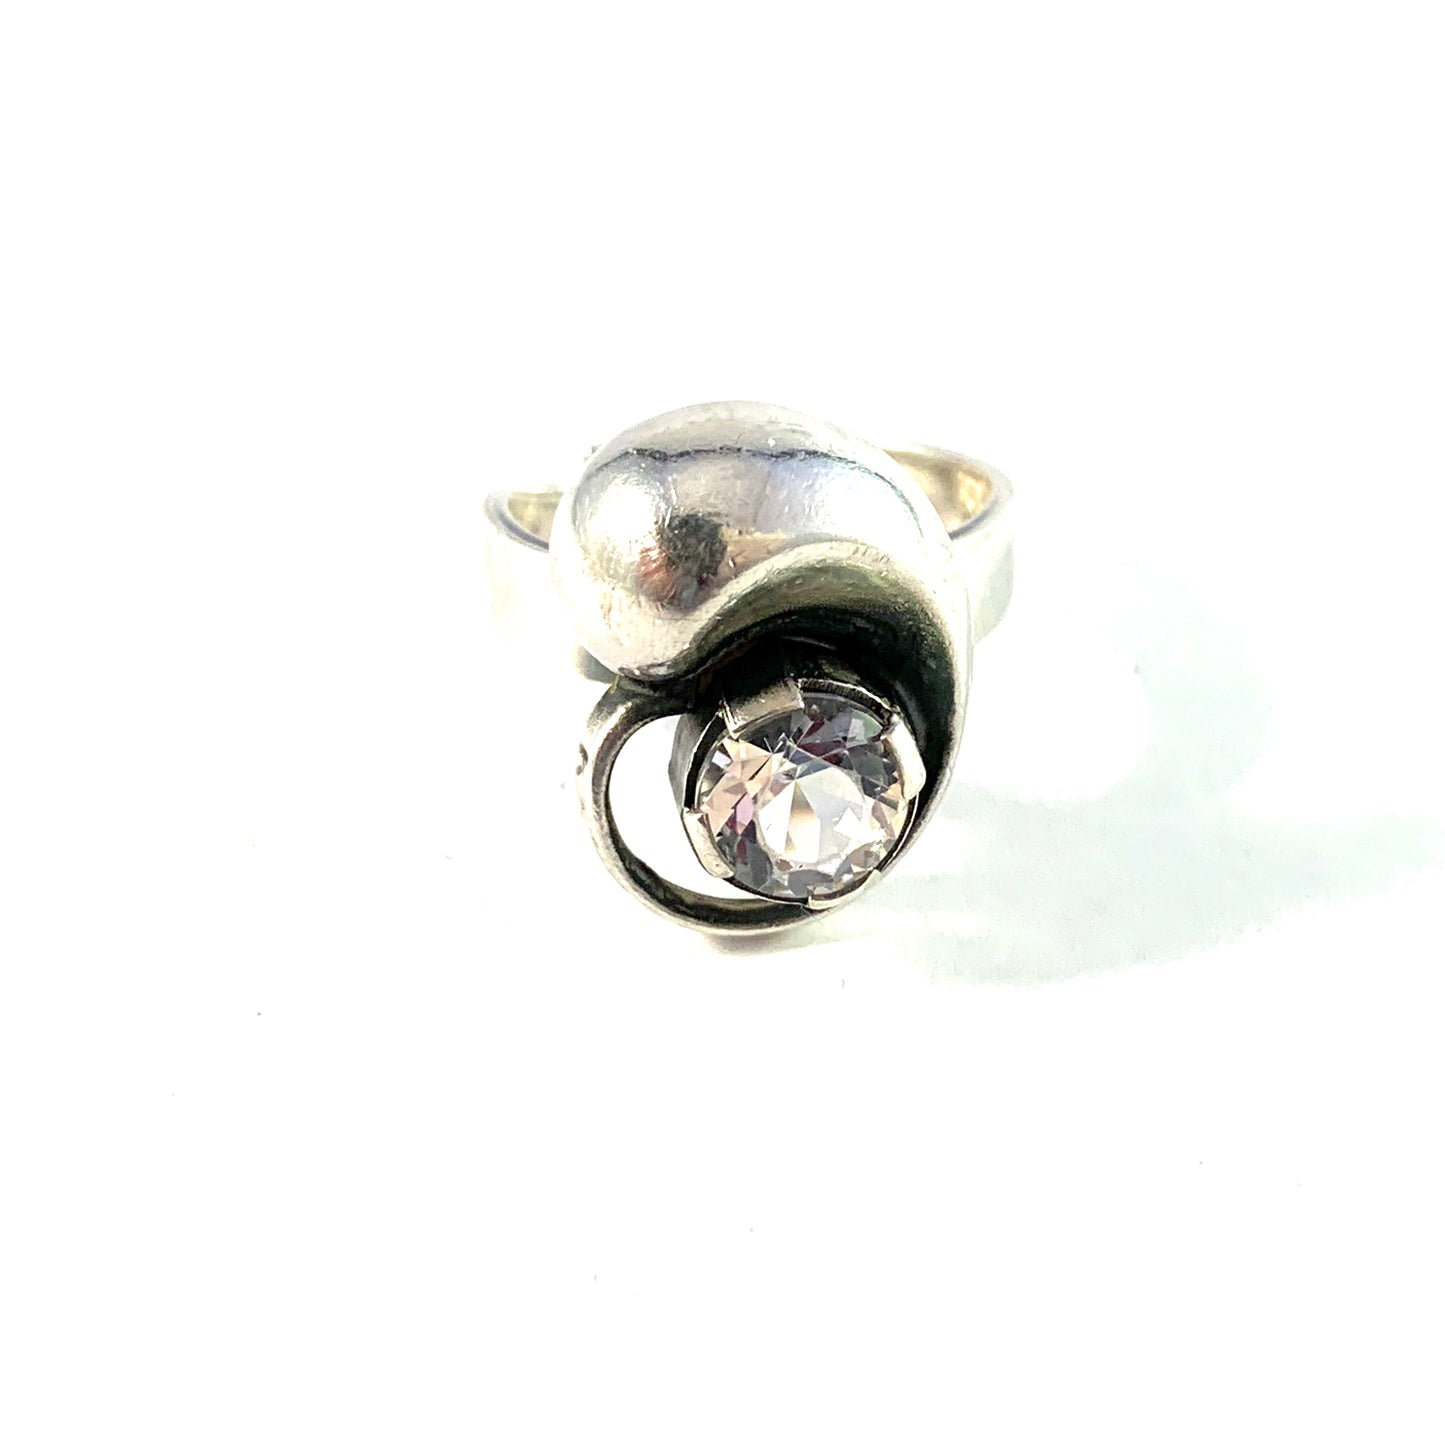 Karl Laine for Sten & Laine Finland 1977. Sterling Silver Rock Crystal Ring.